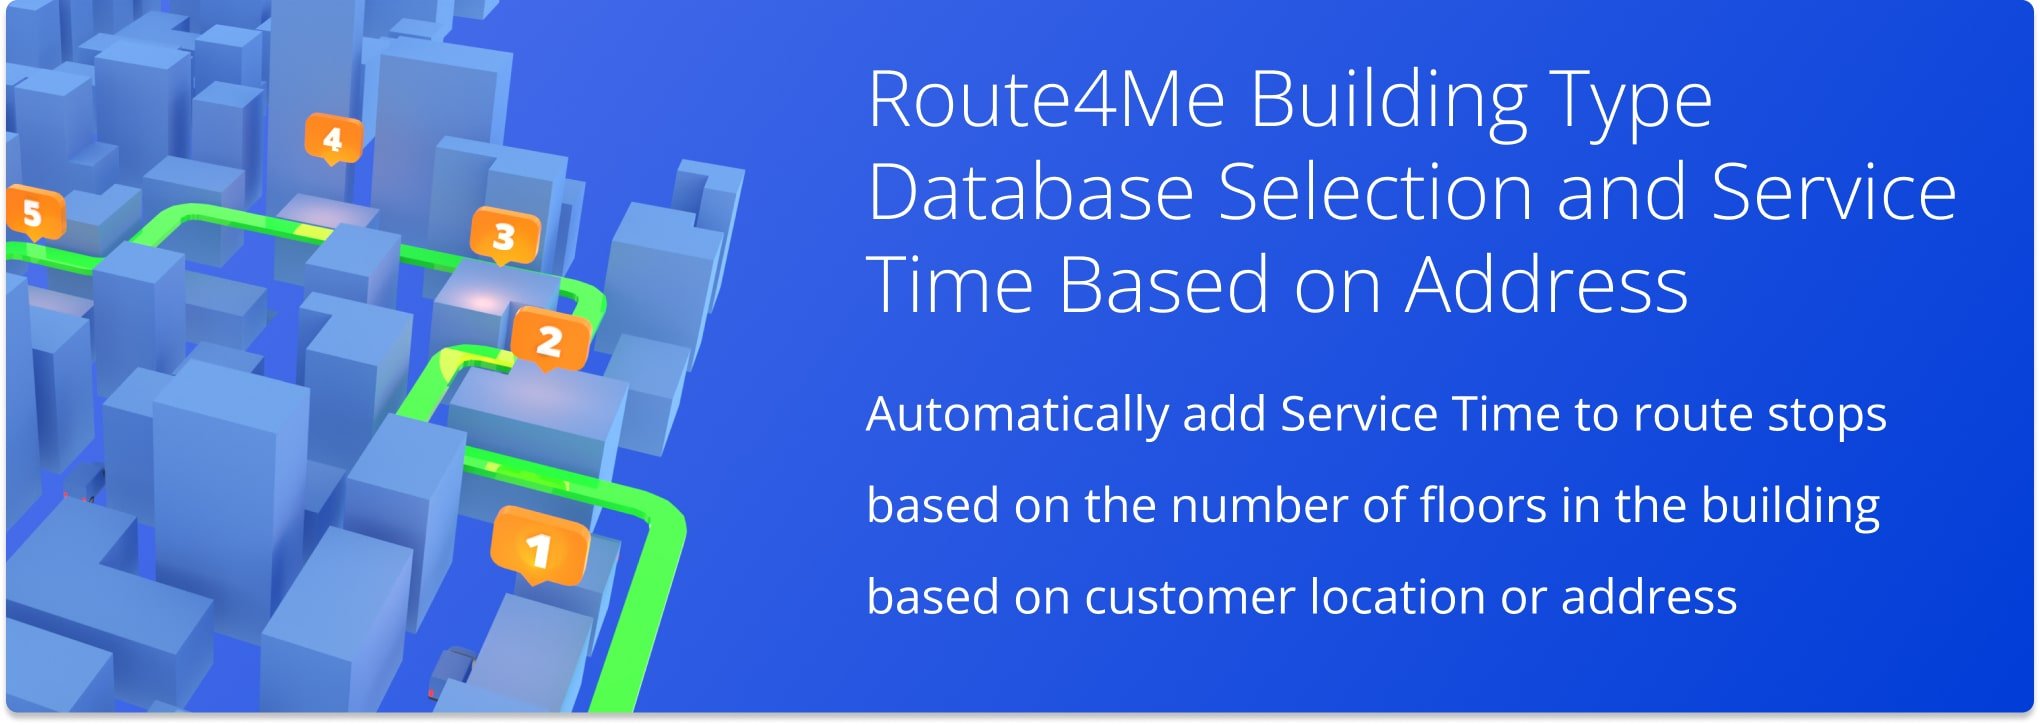 Automatically add service time to route stops based on address building type and number of floors using Route4Me's Last Mile Route Optimization Software.